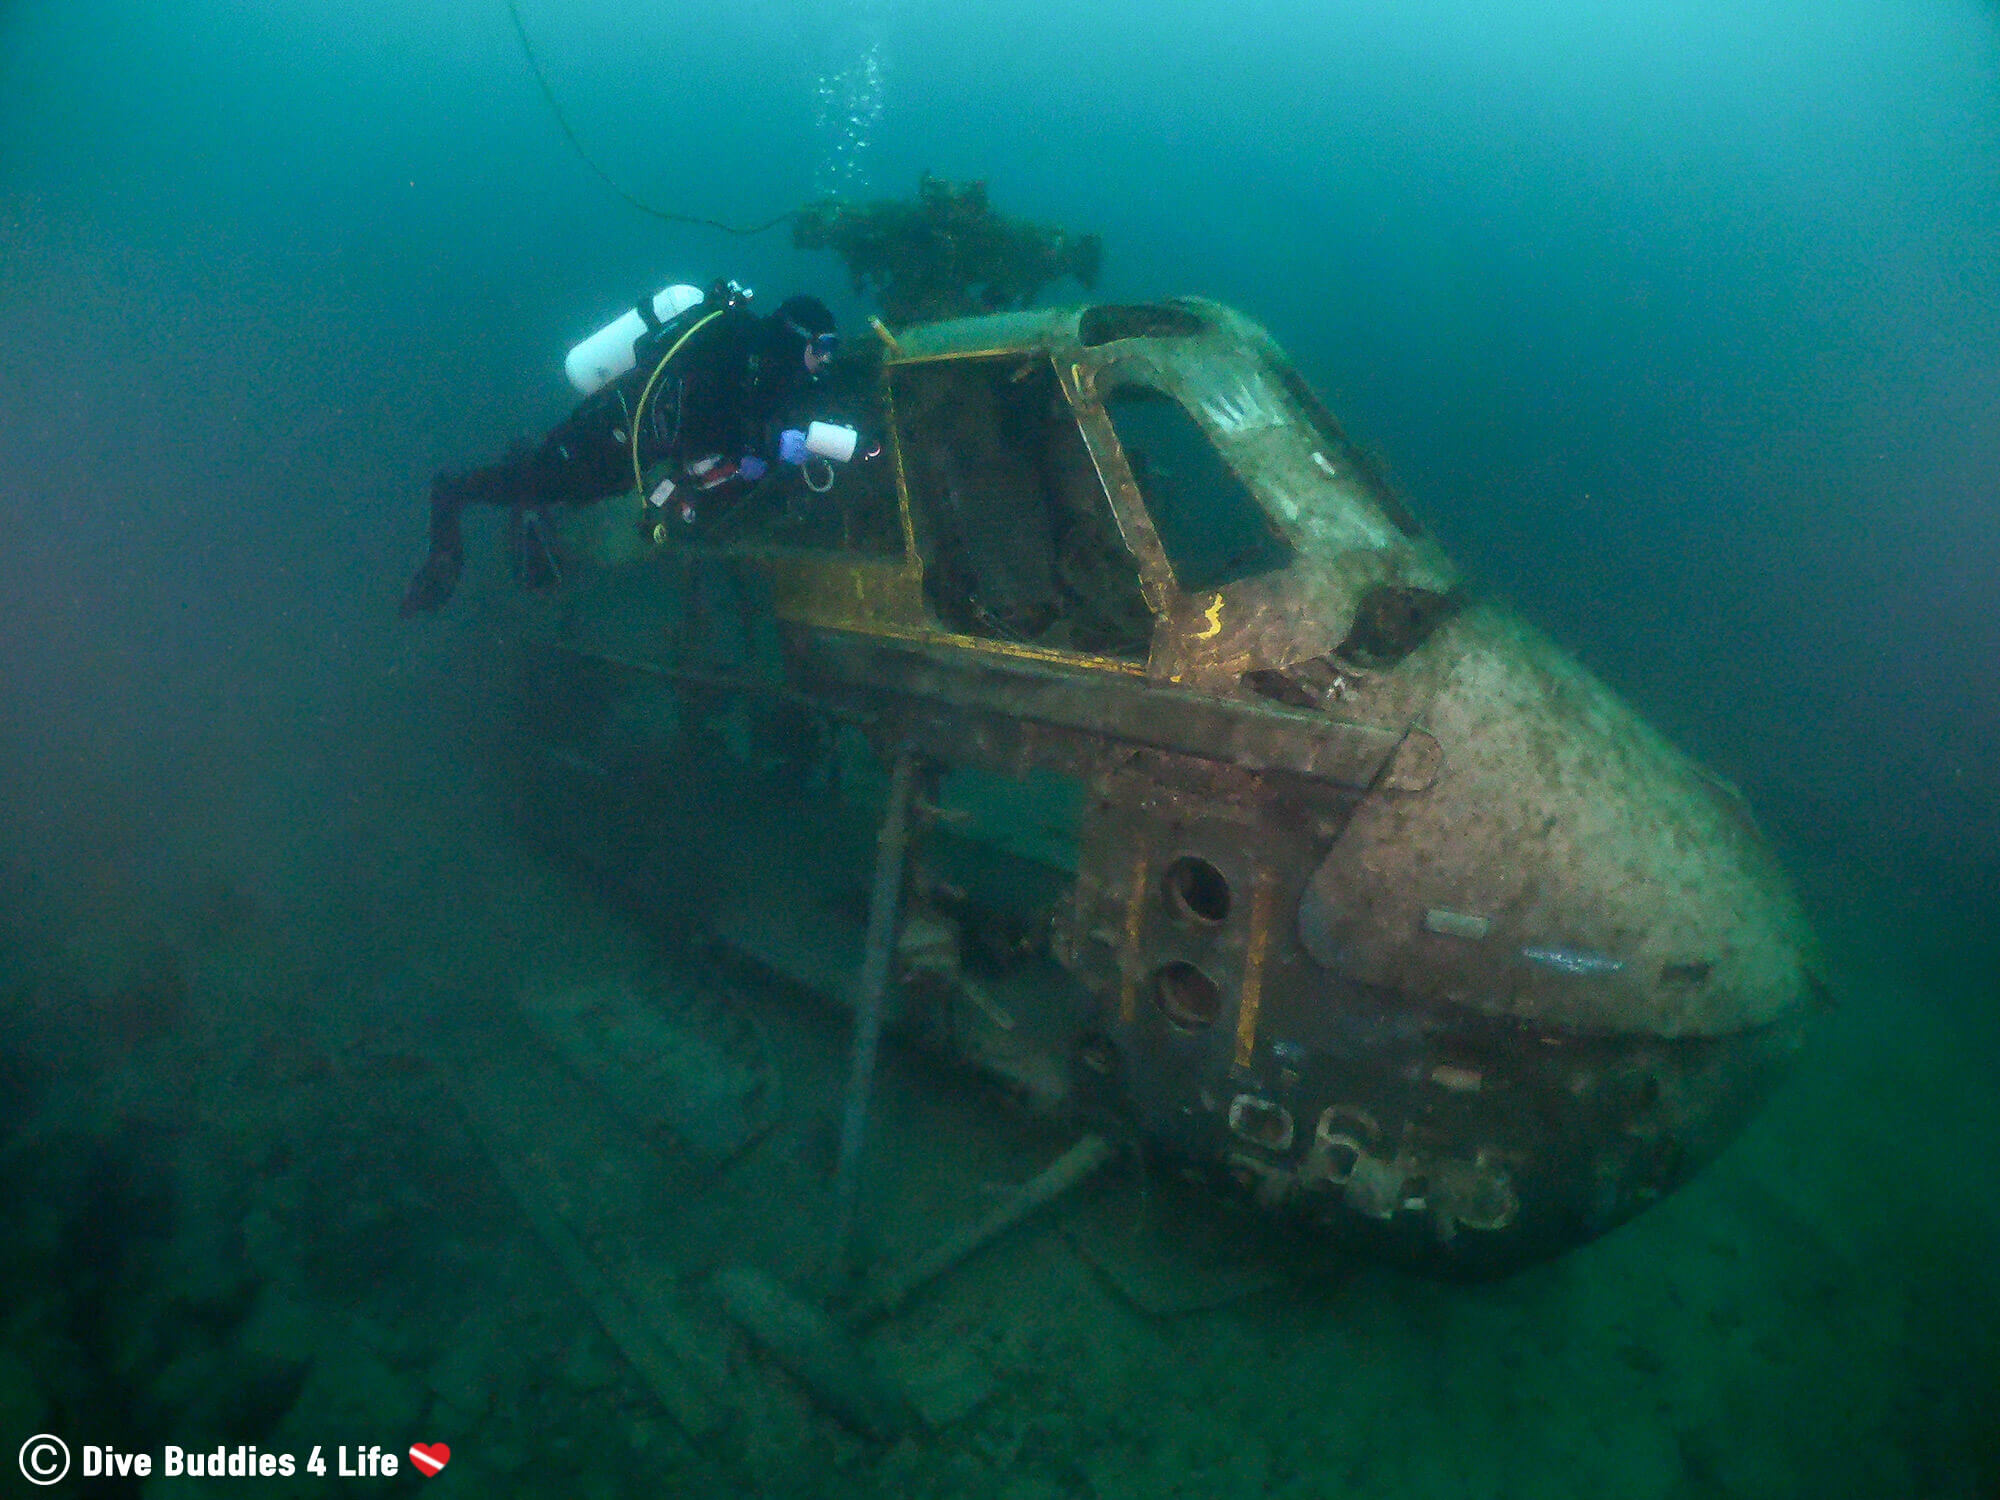 Ali Scuba Diving Around A Sunken Helicopter In The Chepstow Quarry, Wales, UK